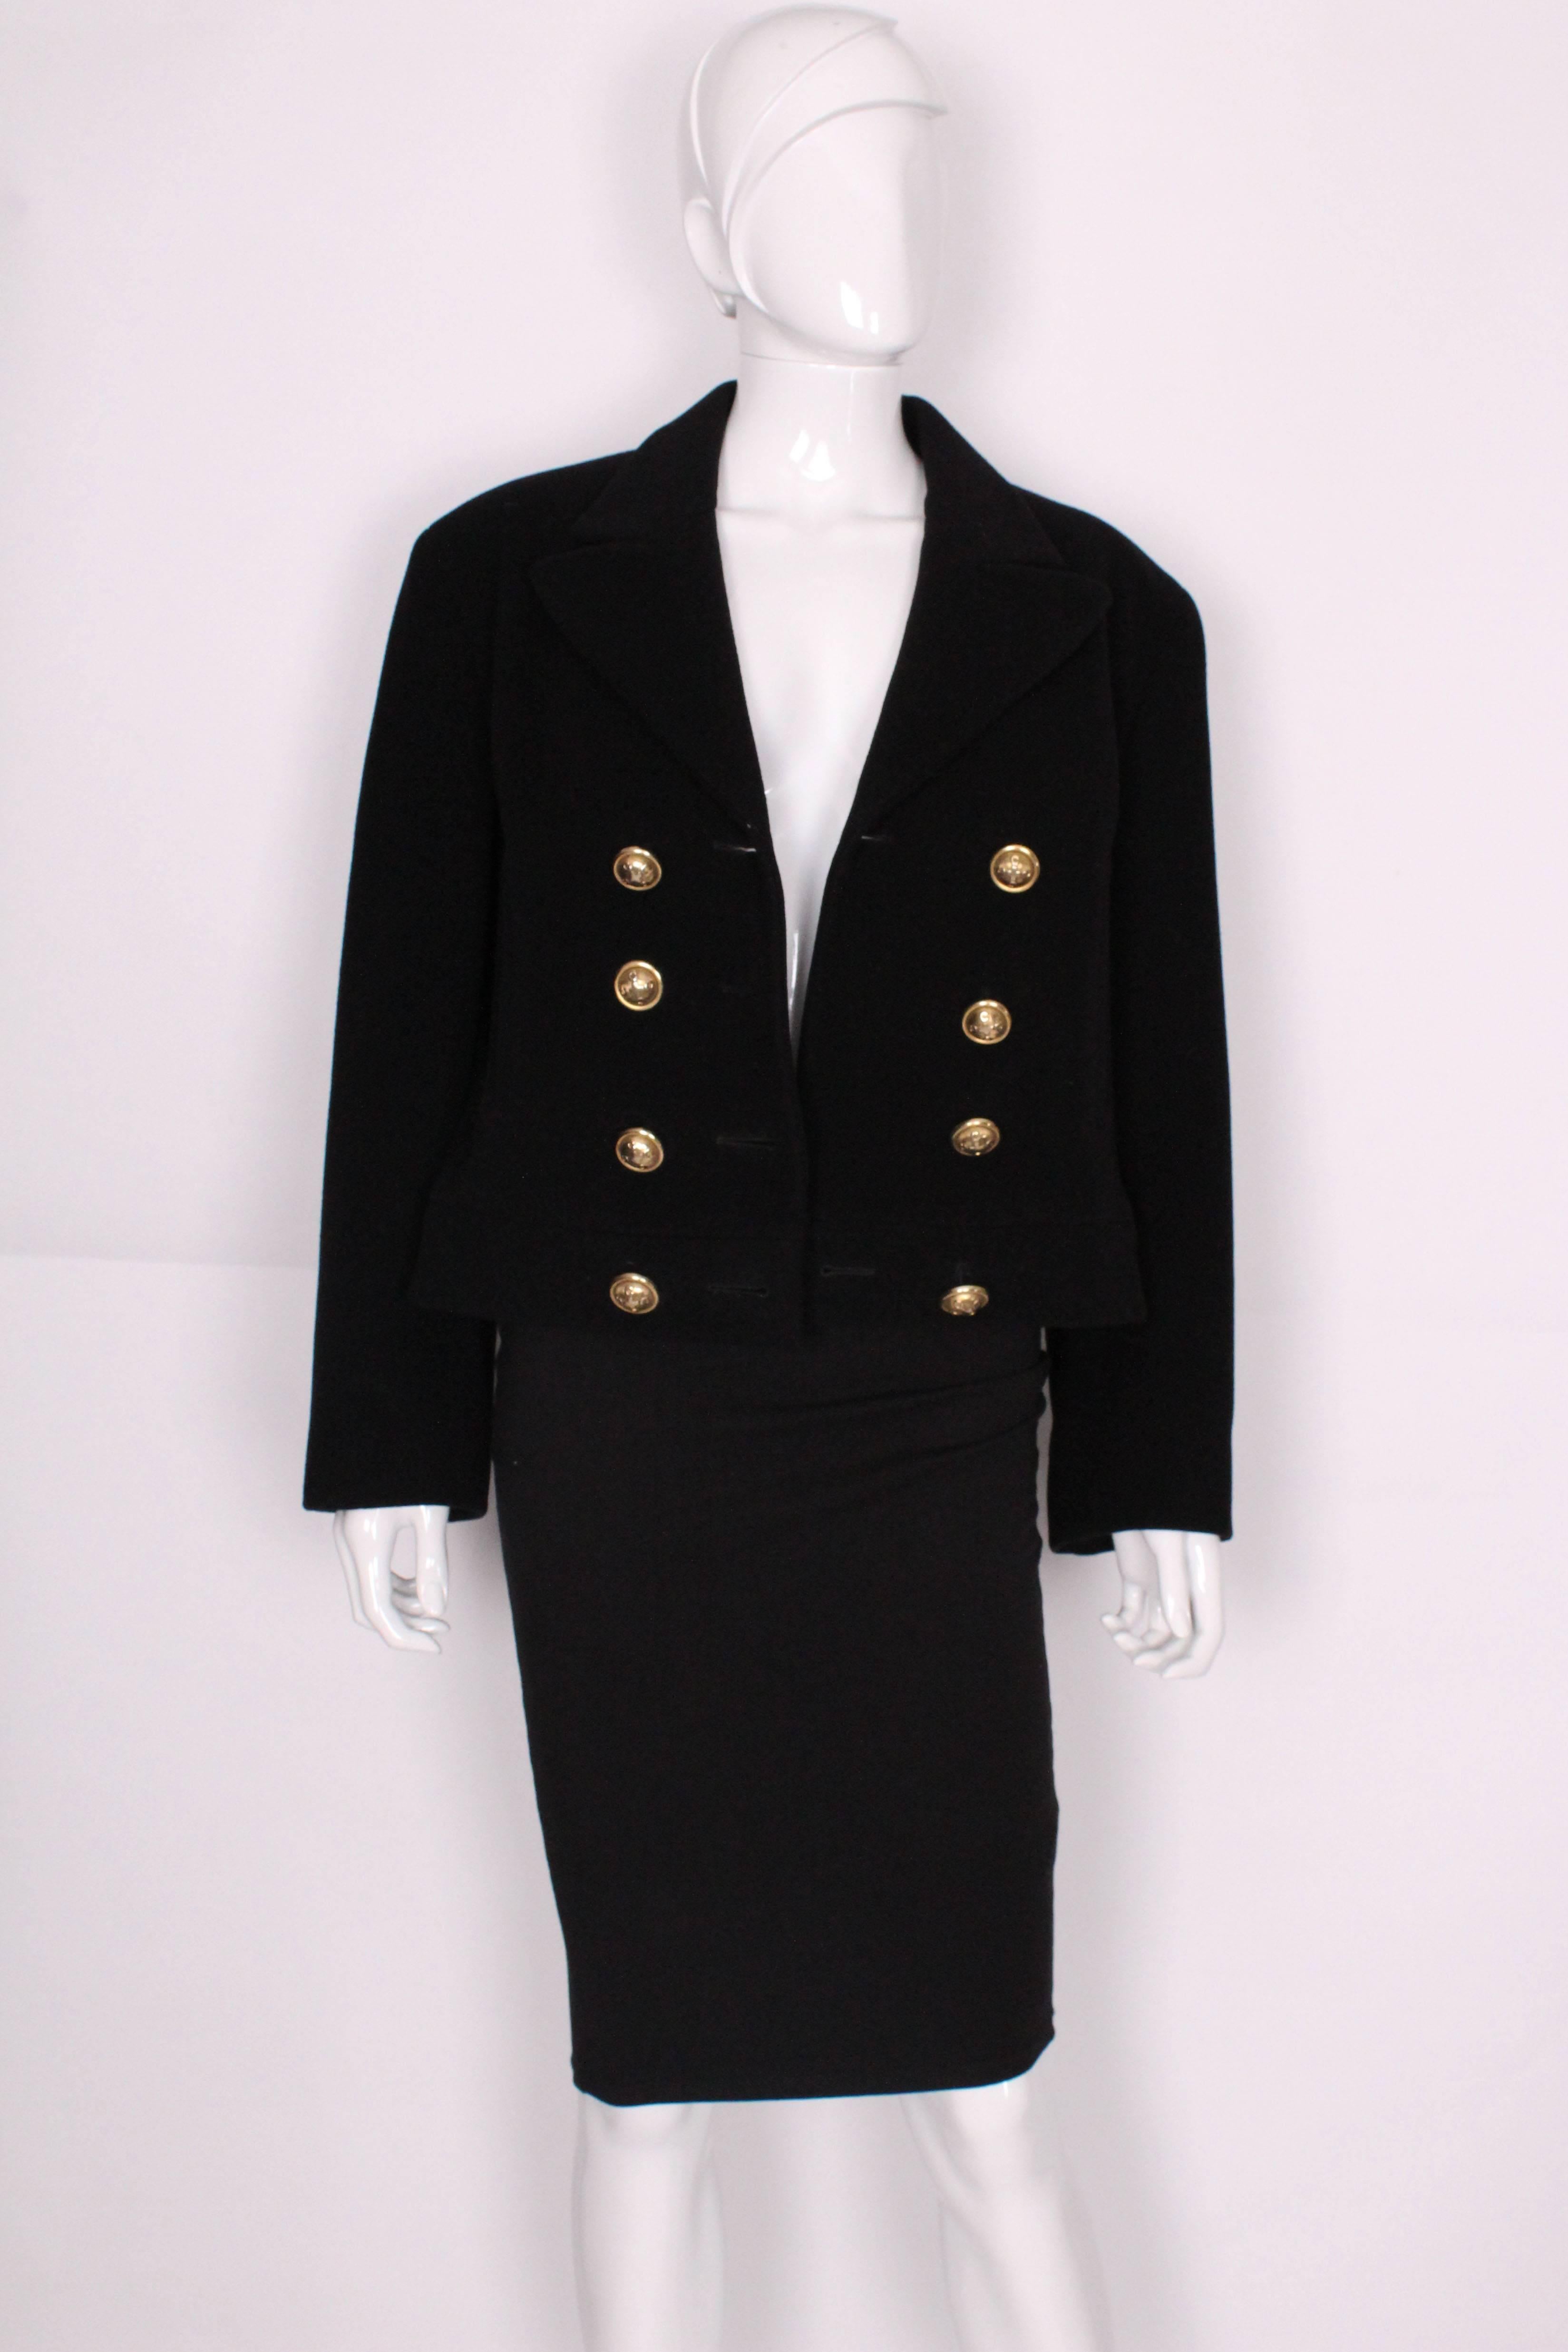 Women's Wool and Mohair Jacket by Moschino Cheap and Chic.